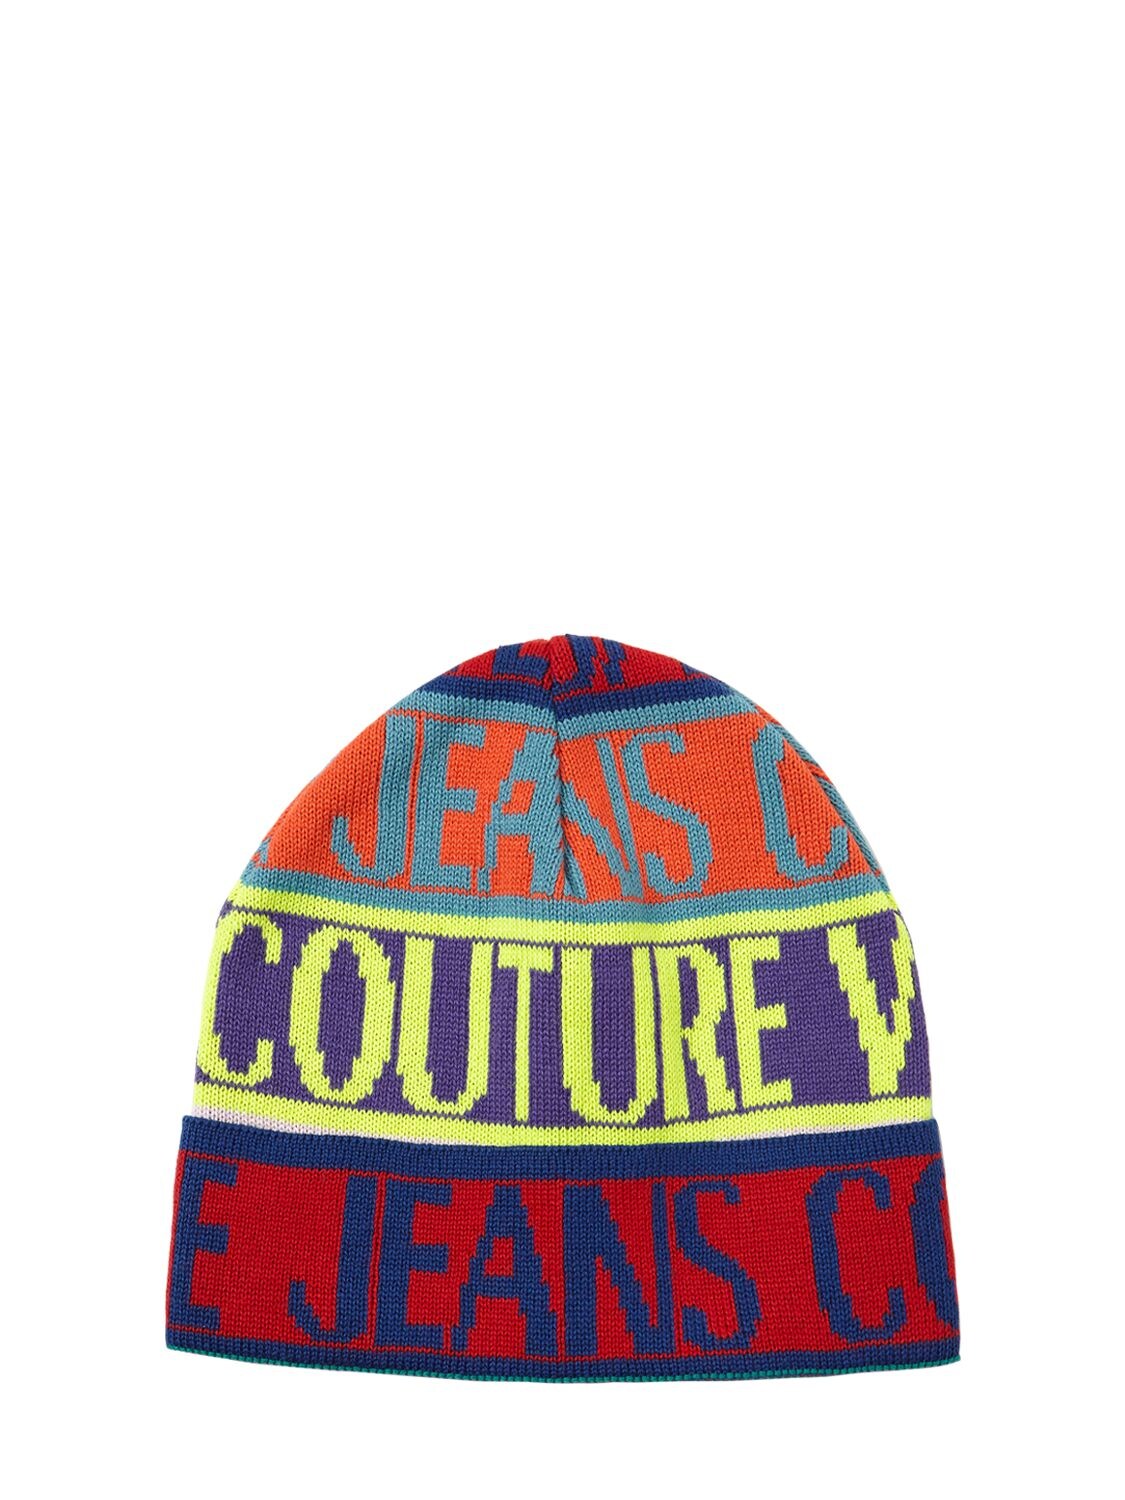 VERSACE JEANS COUTURE ALL OVER LOGO BEANIE,74IK2C020-OTGY0